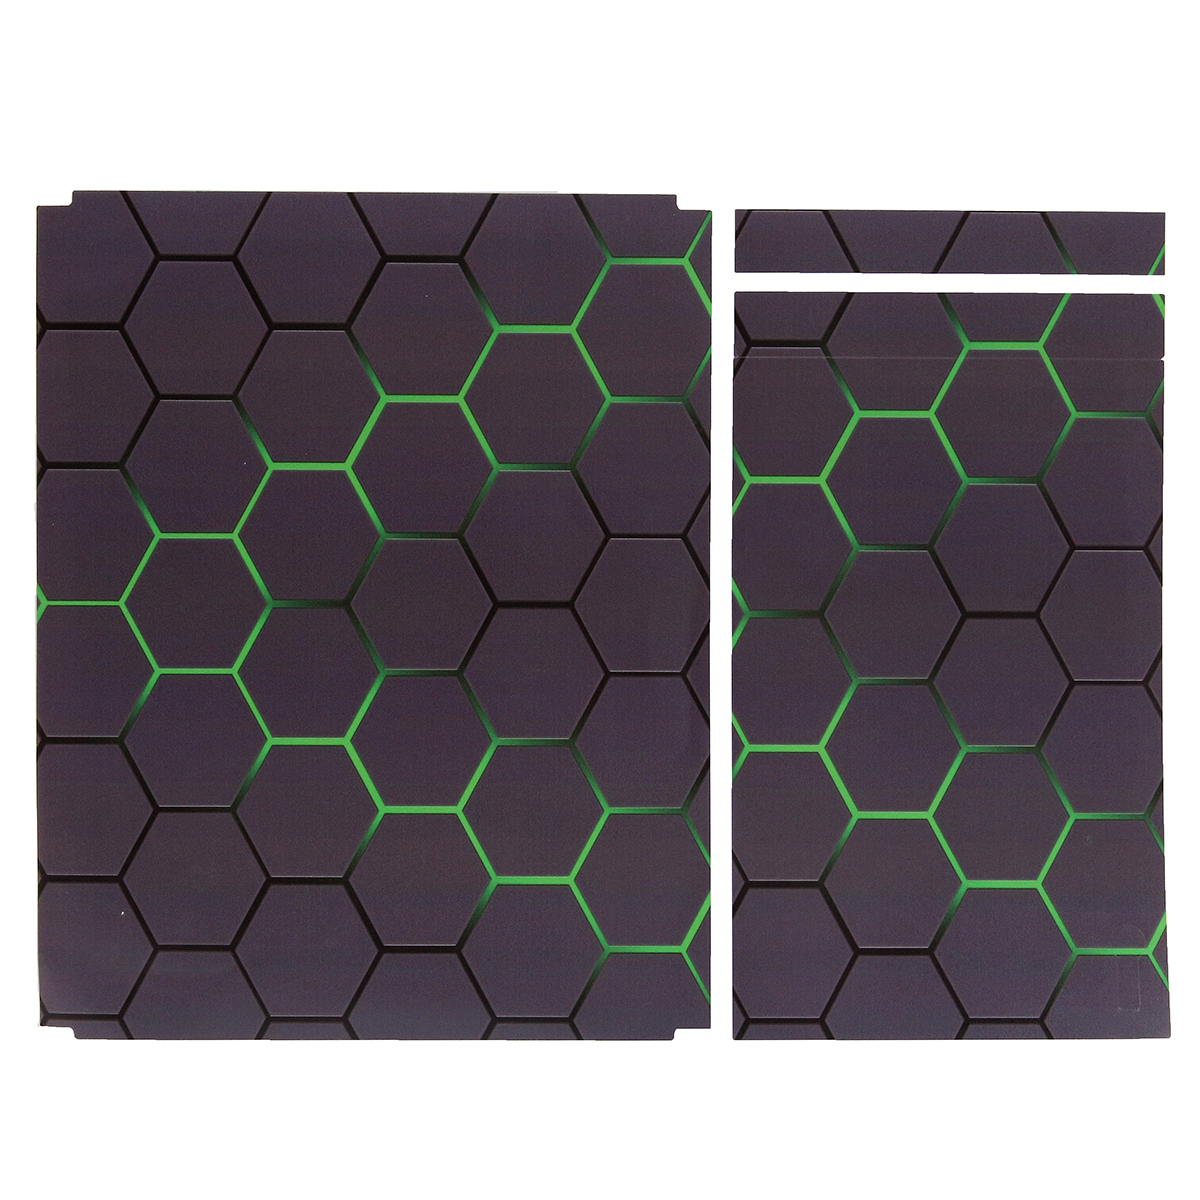 Green Grid Vinyl Decal Skin Stickers Cover for Xbox One S Game Console&2 Controllers 58